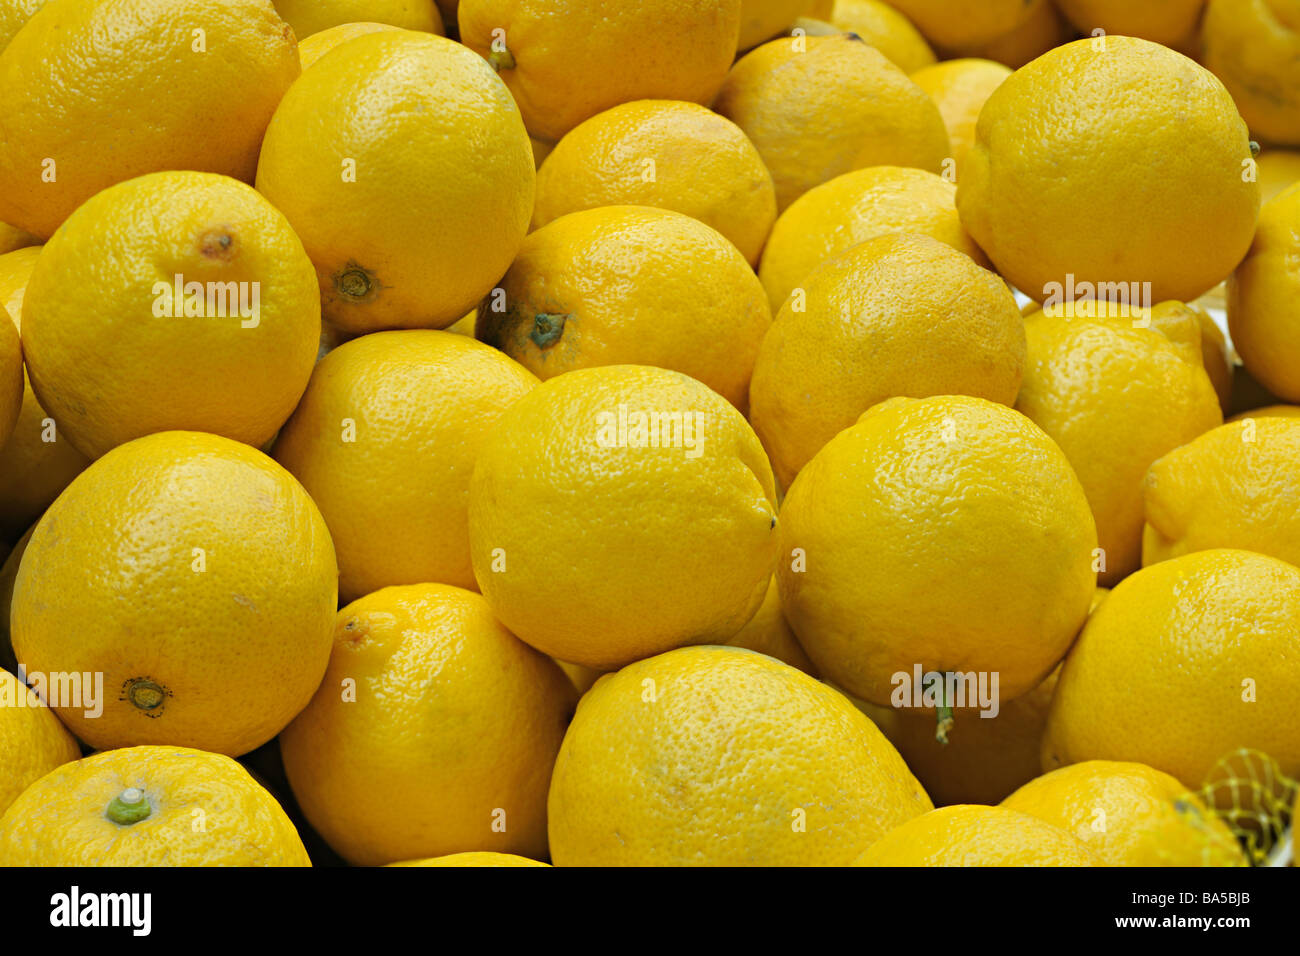 Closeup of collection of whole lemons on a market stall Stock Photo